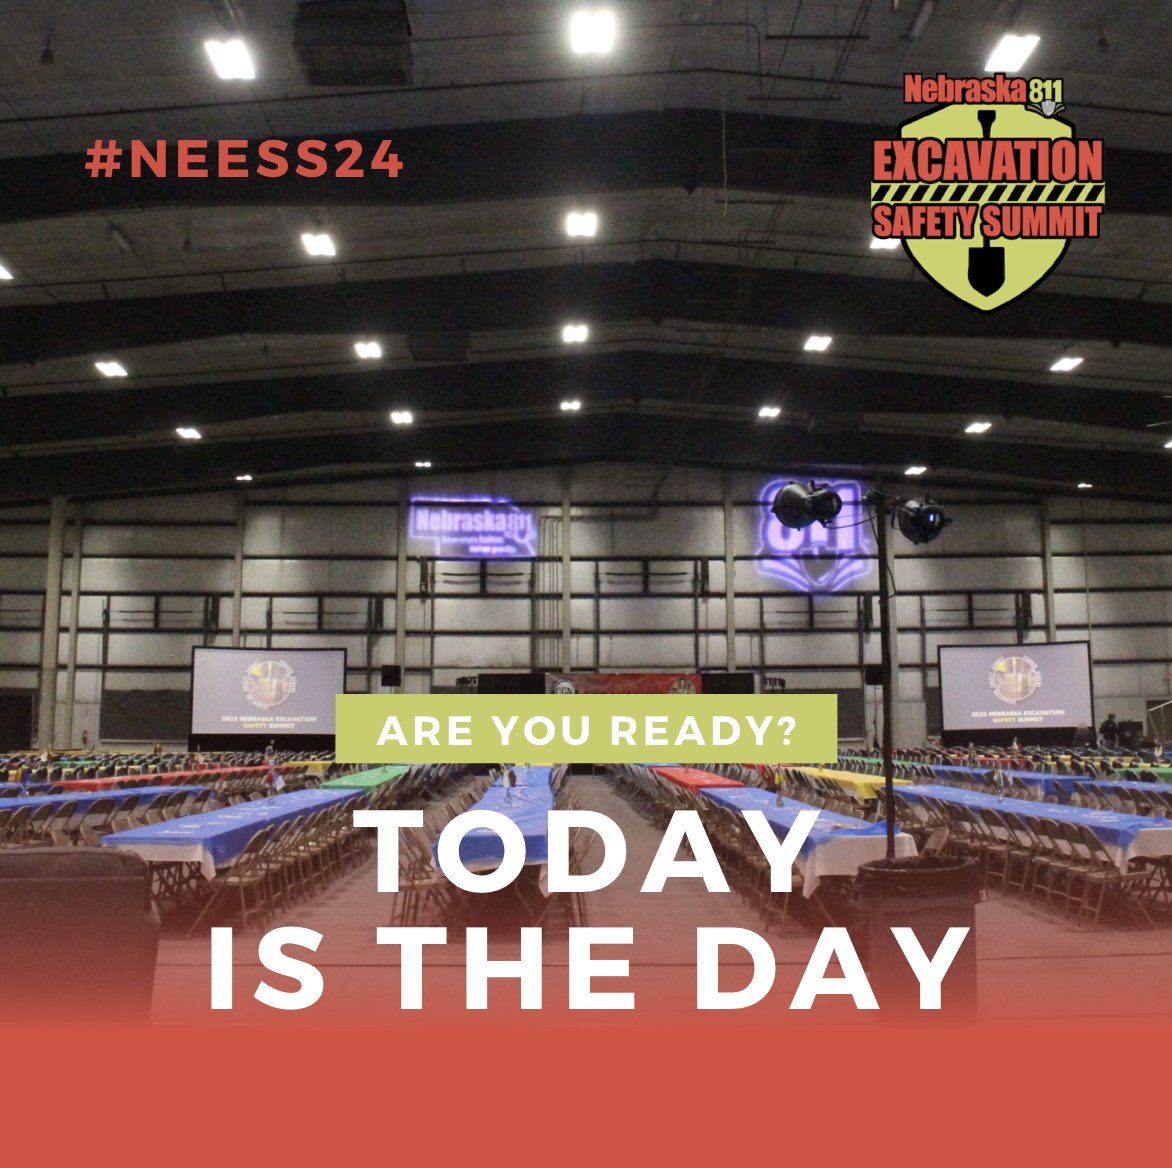 TODAY IS the 13th Annual NE Excavation Safety Summit is finally here! Join us for a day of learning, networking, and fun at the Sandhills Global Event Center on 84th and Havelock. Don't miss out on valuable sessions, exciting rodeos, exhibitor booths, and more! See you there!